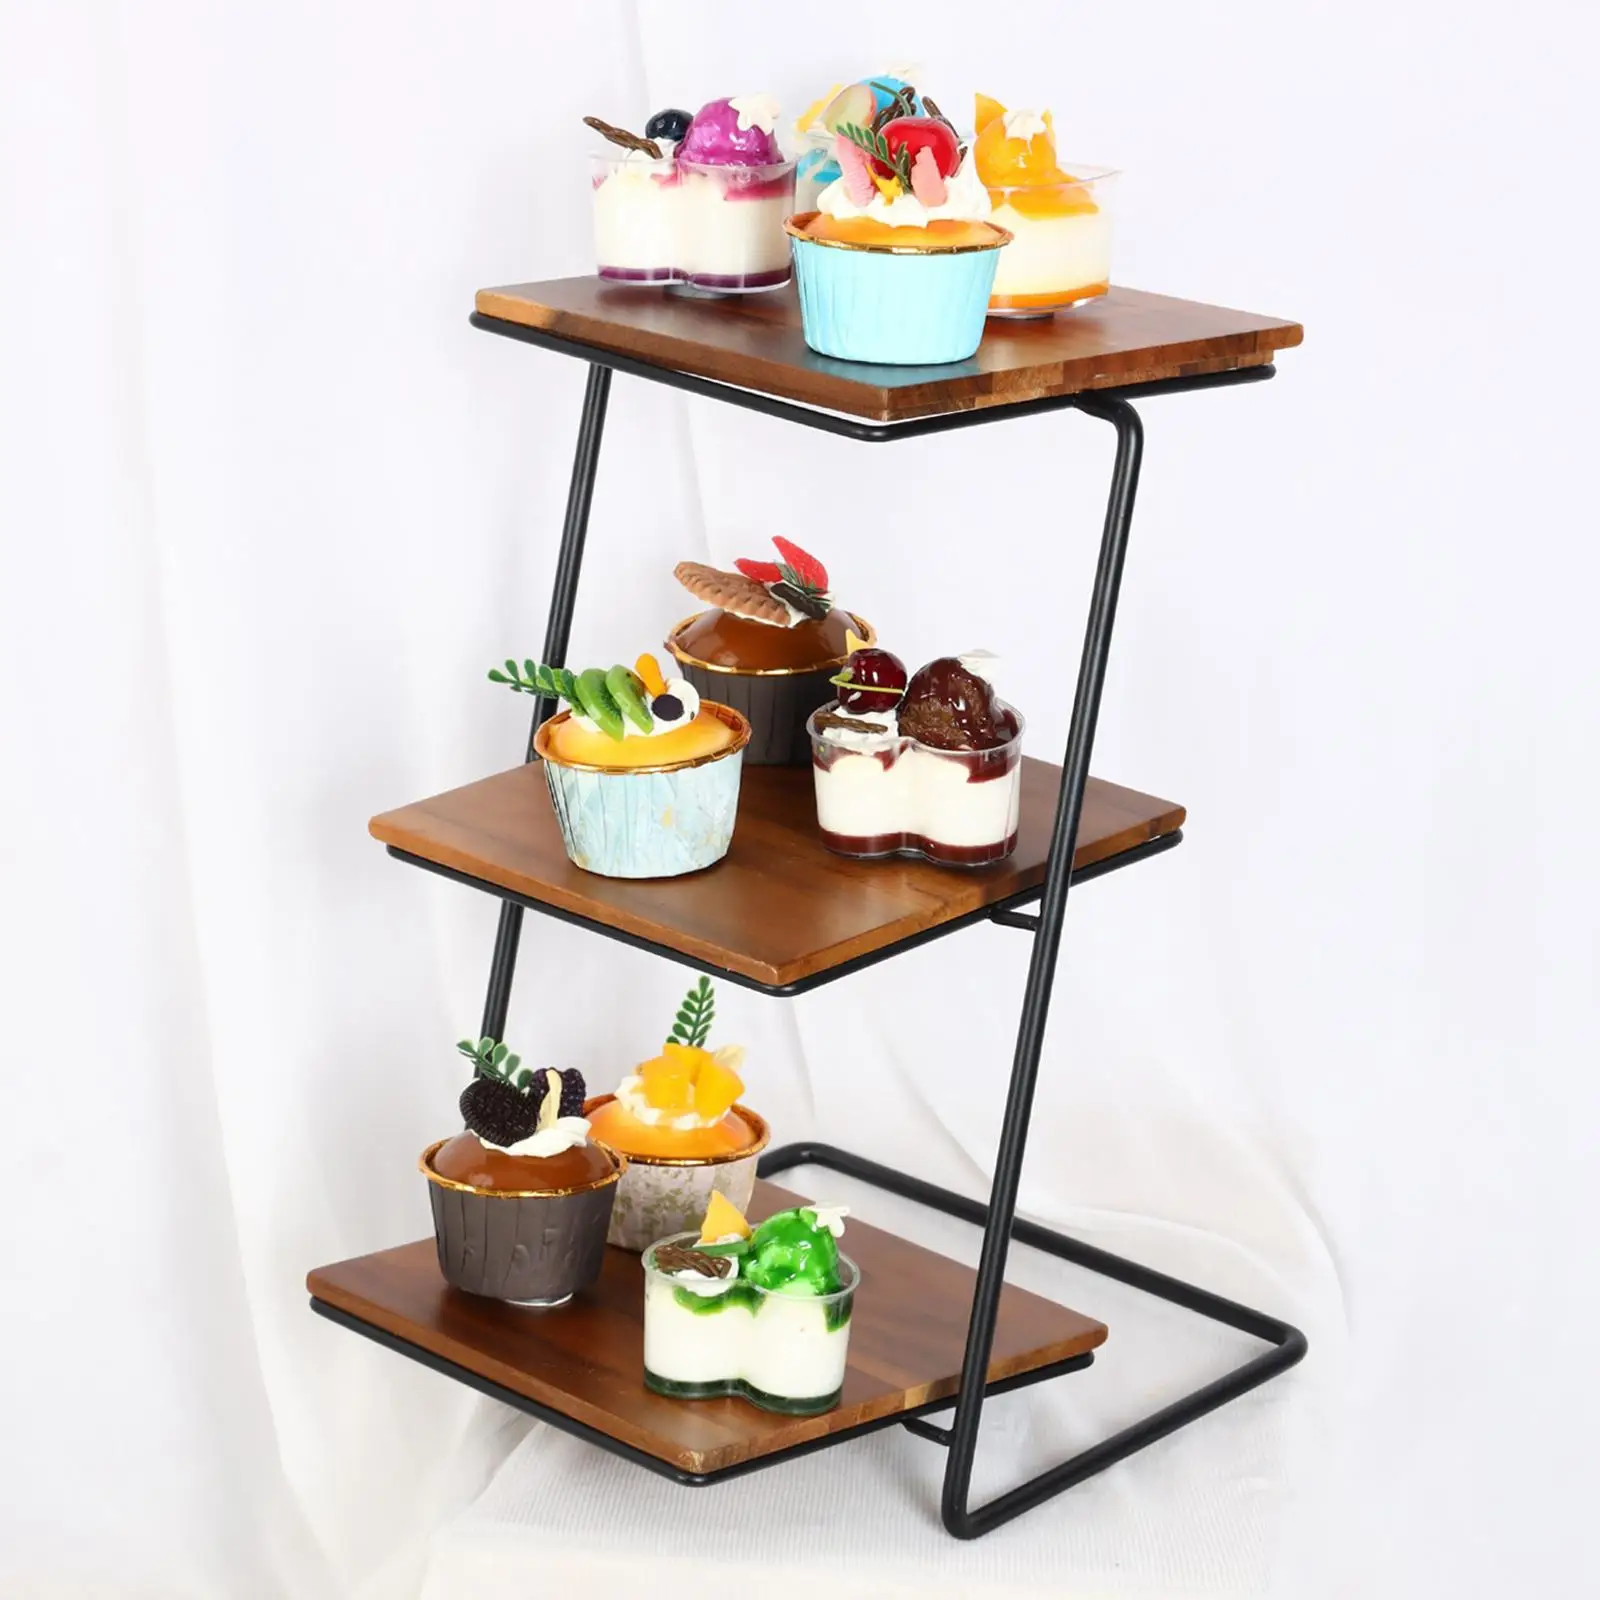 Japanese Style Cake Stand Fruit Dessert Plate 3rd Dish Clay Pedestal for Holiday Party Decorations Home Decor Sturdy